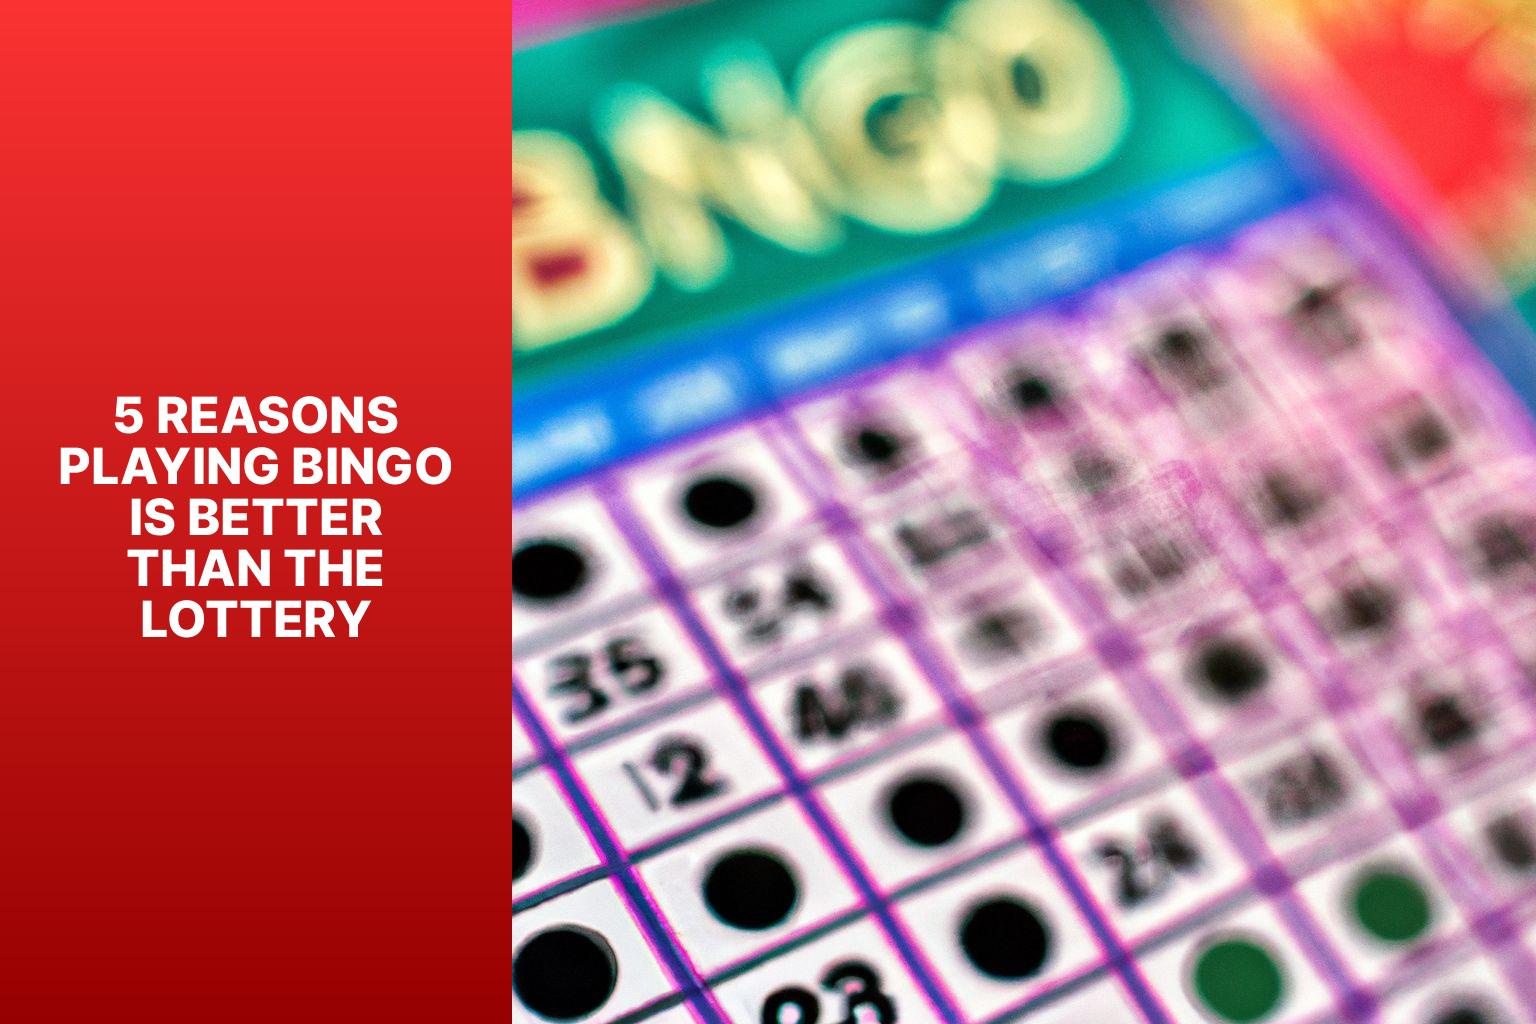 5 Reasons Playing Bingo Is Better Than the Lottery